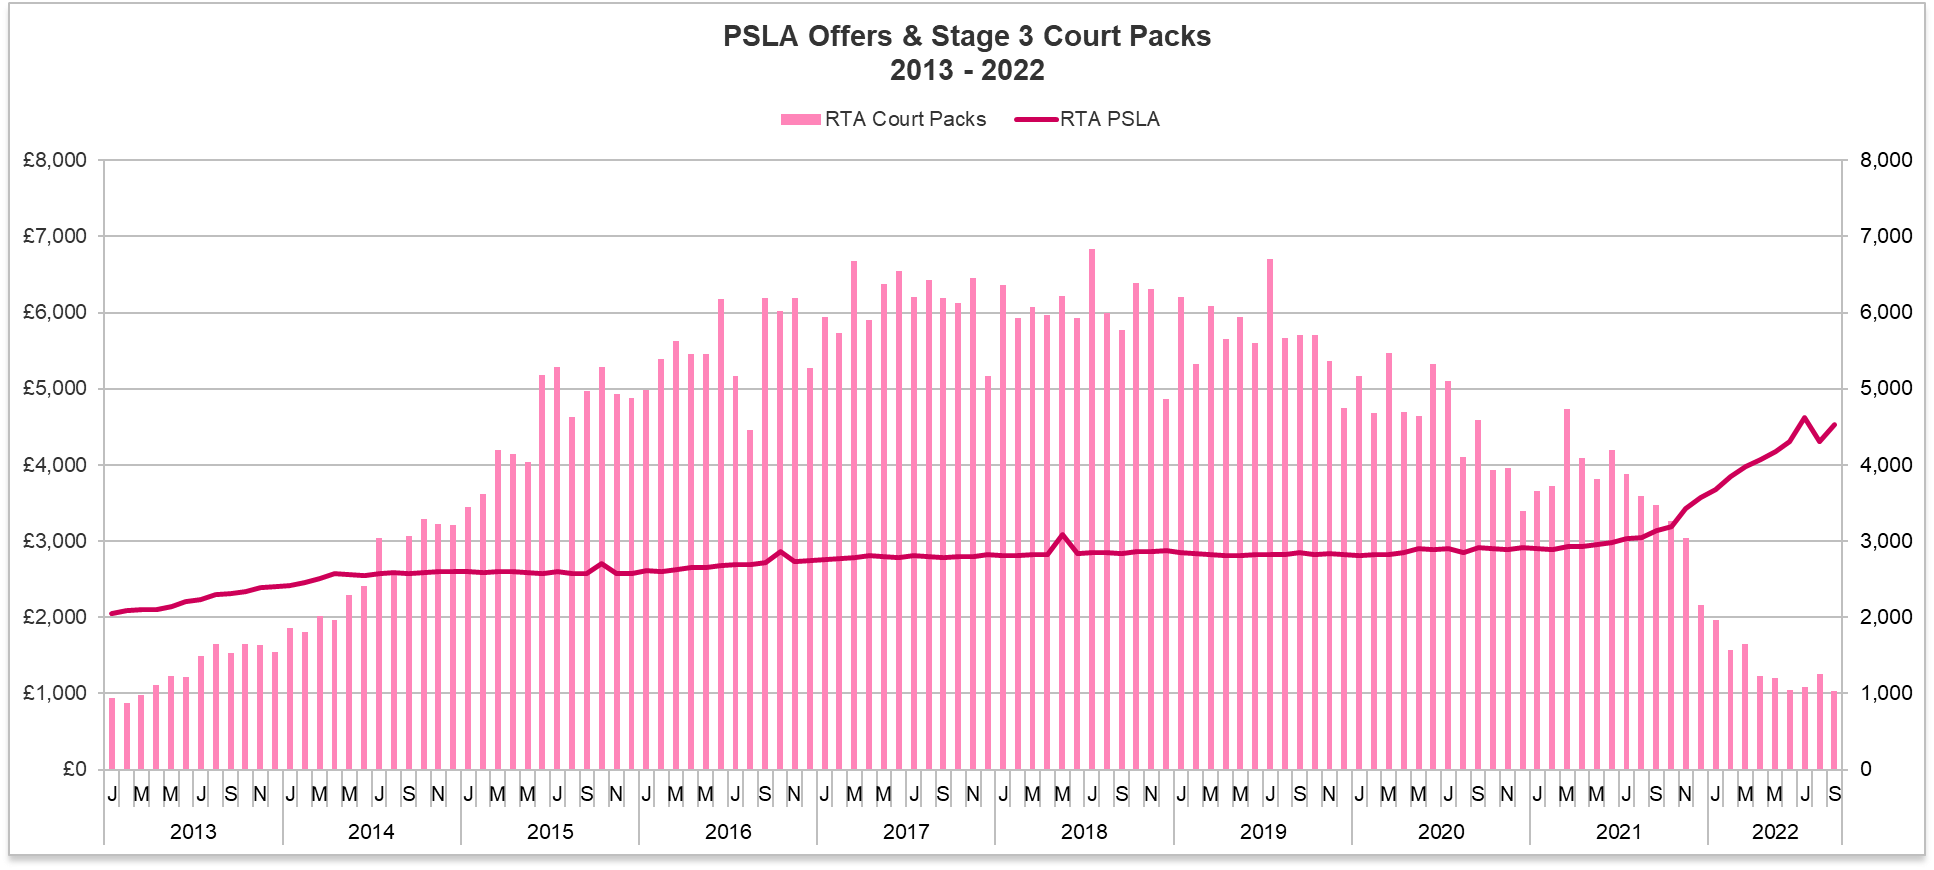 PSLA Offers and Court Packs